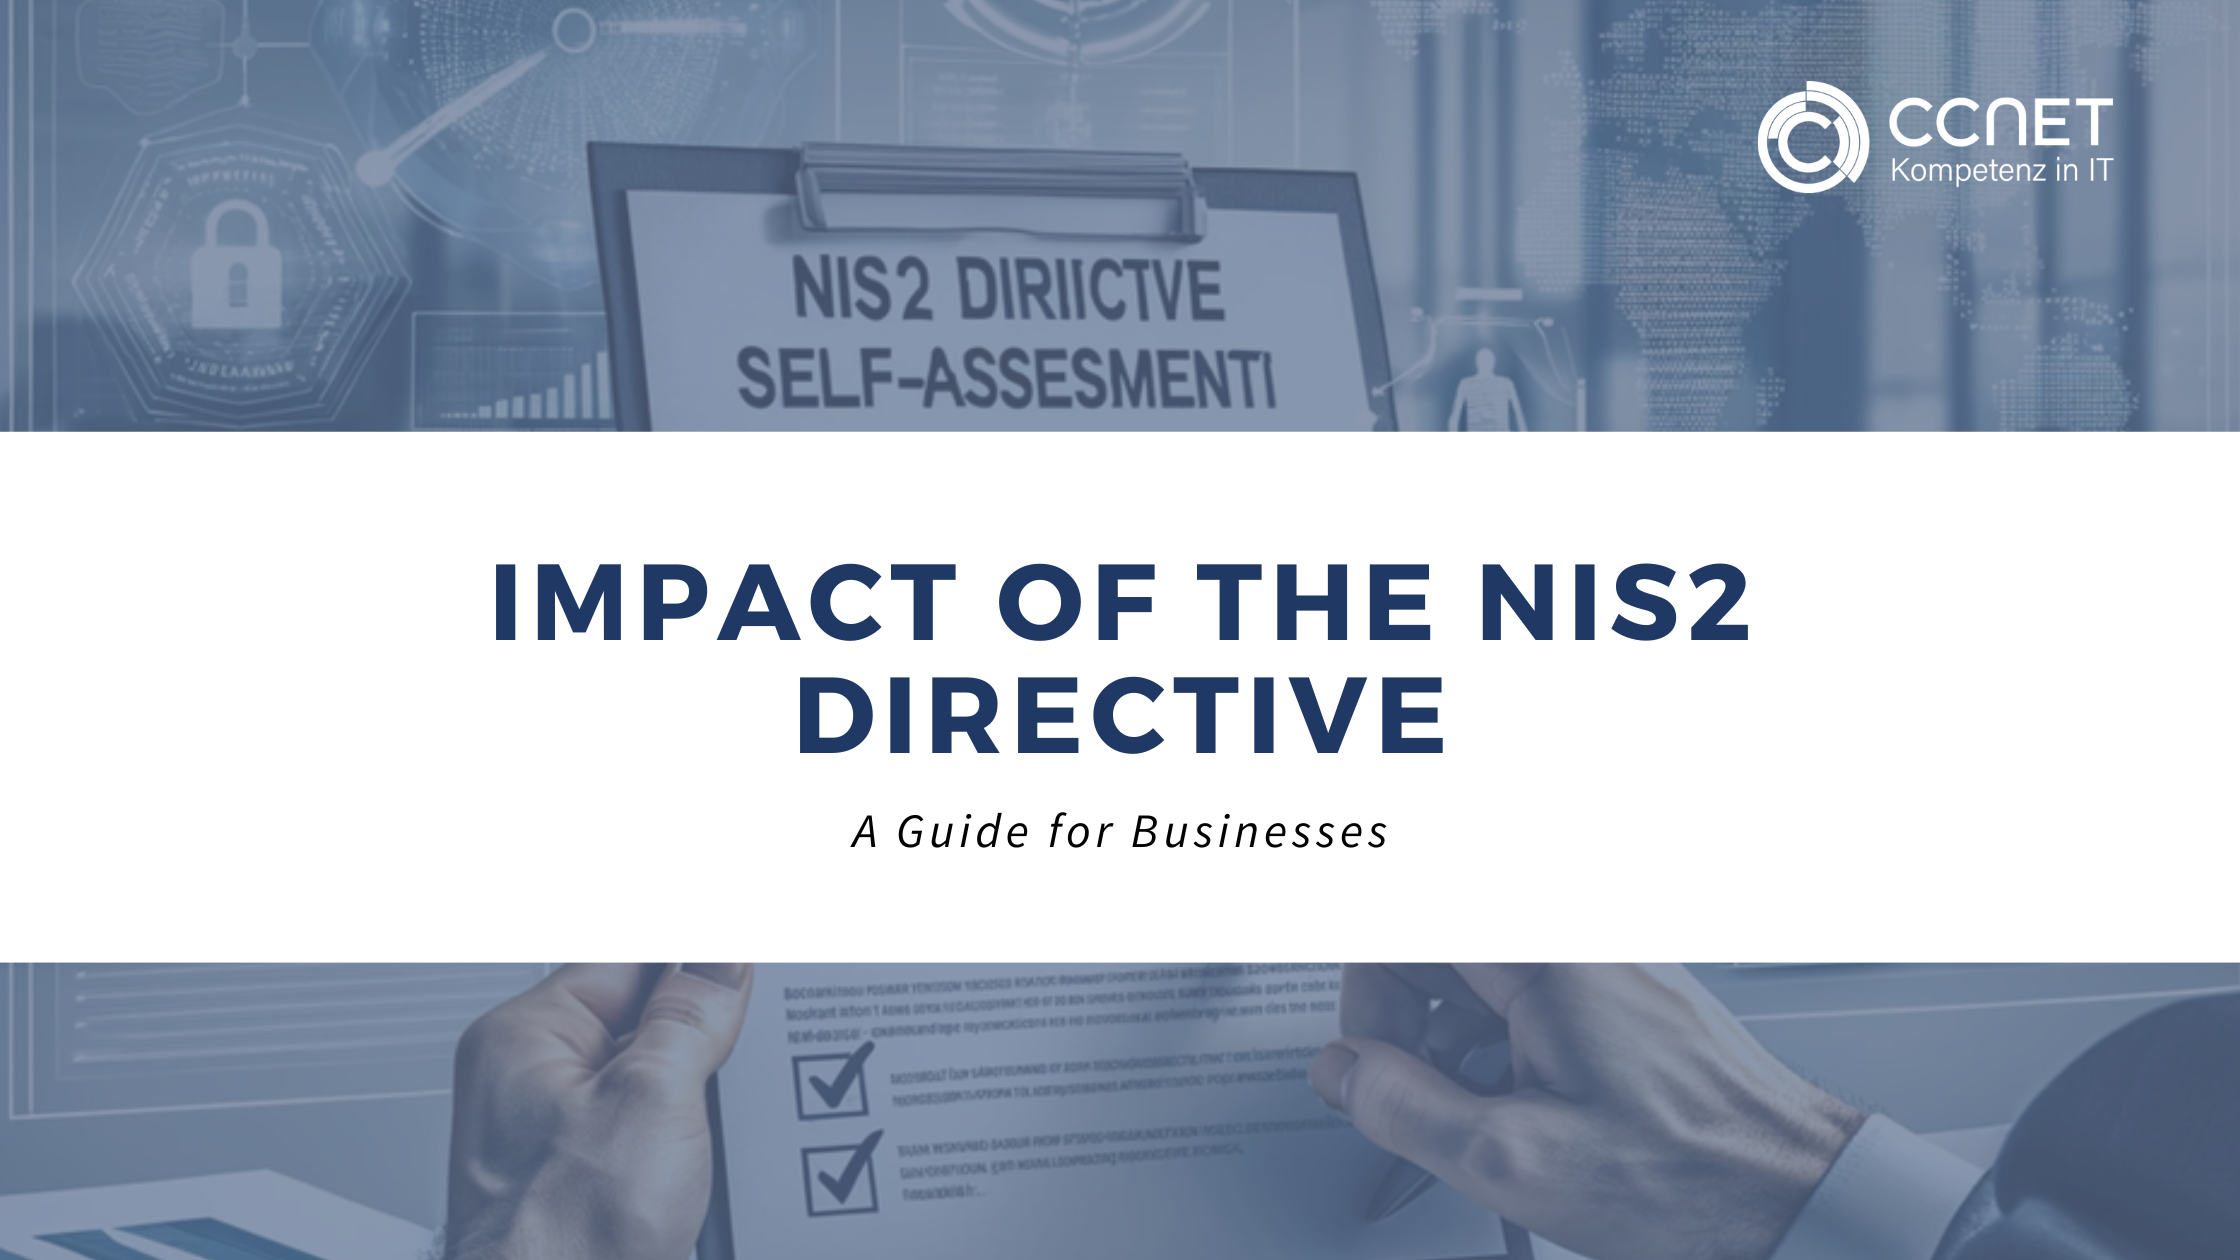 Impact of the NIS2 - A guide for Businesses